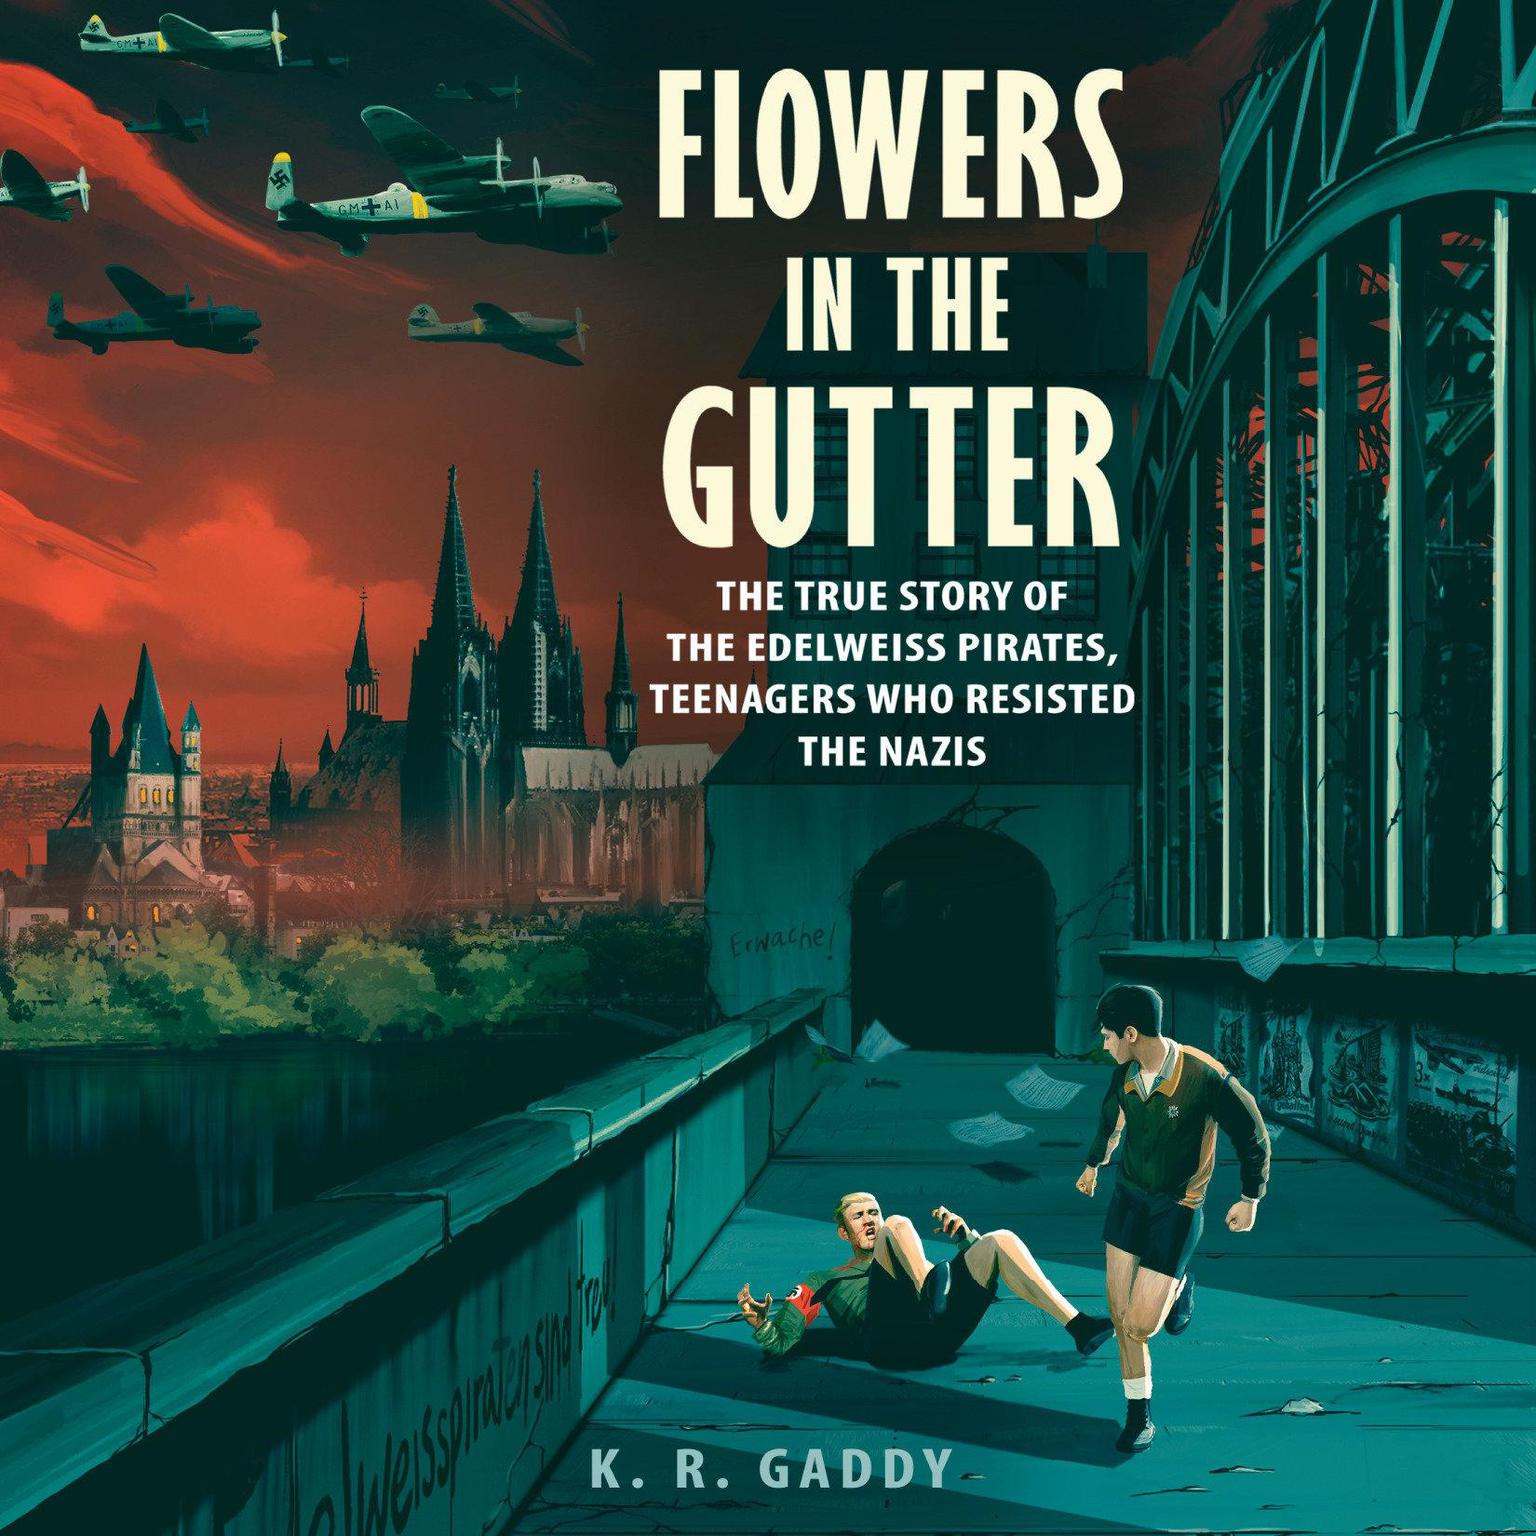 Flowers in the Gutter: The True Story of the Edelweiss Pirates, Teenagers Who Resisted the Nazis Audiobook, by K. R. Gaddy